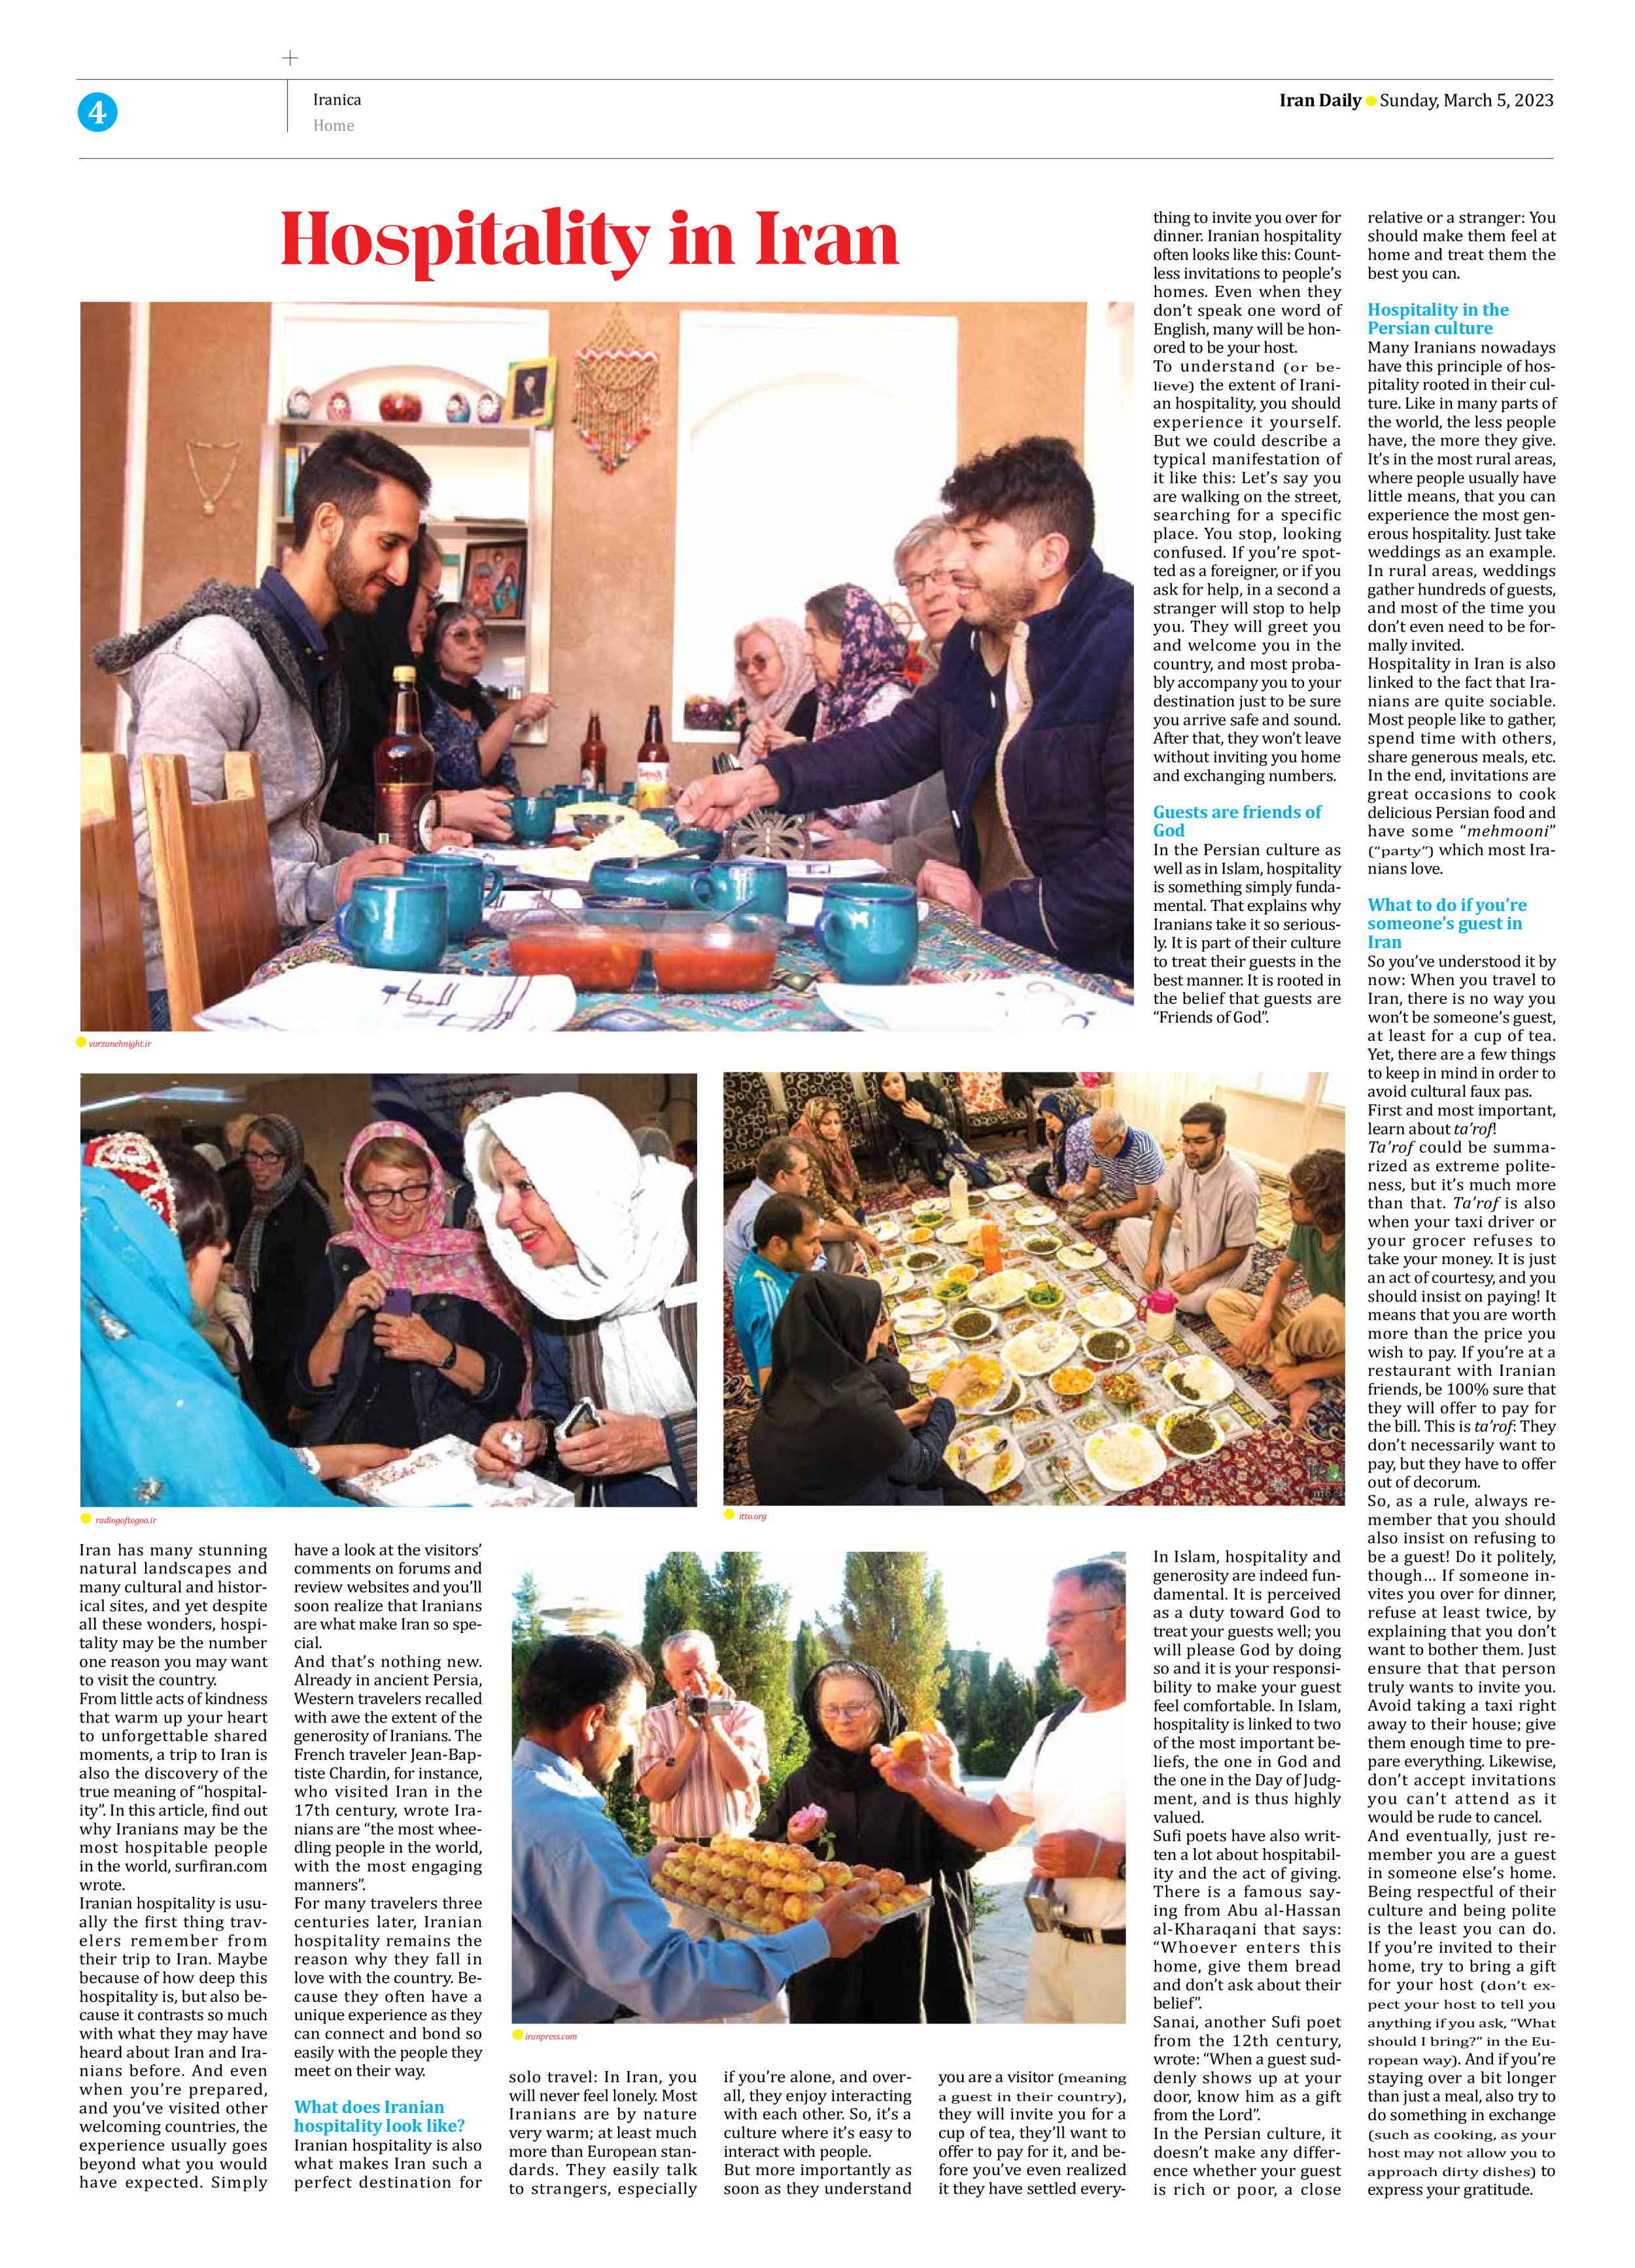 Iran Daily - Number Seven Thousand Two Hundred and Fifty One - 05 March 2023 - Page 4